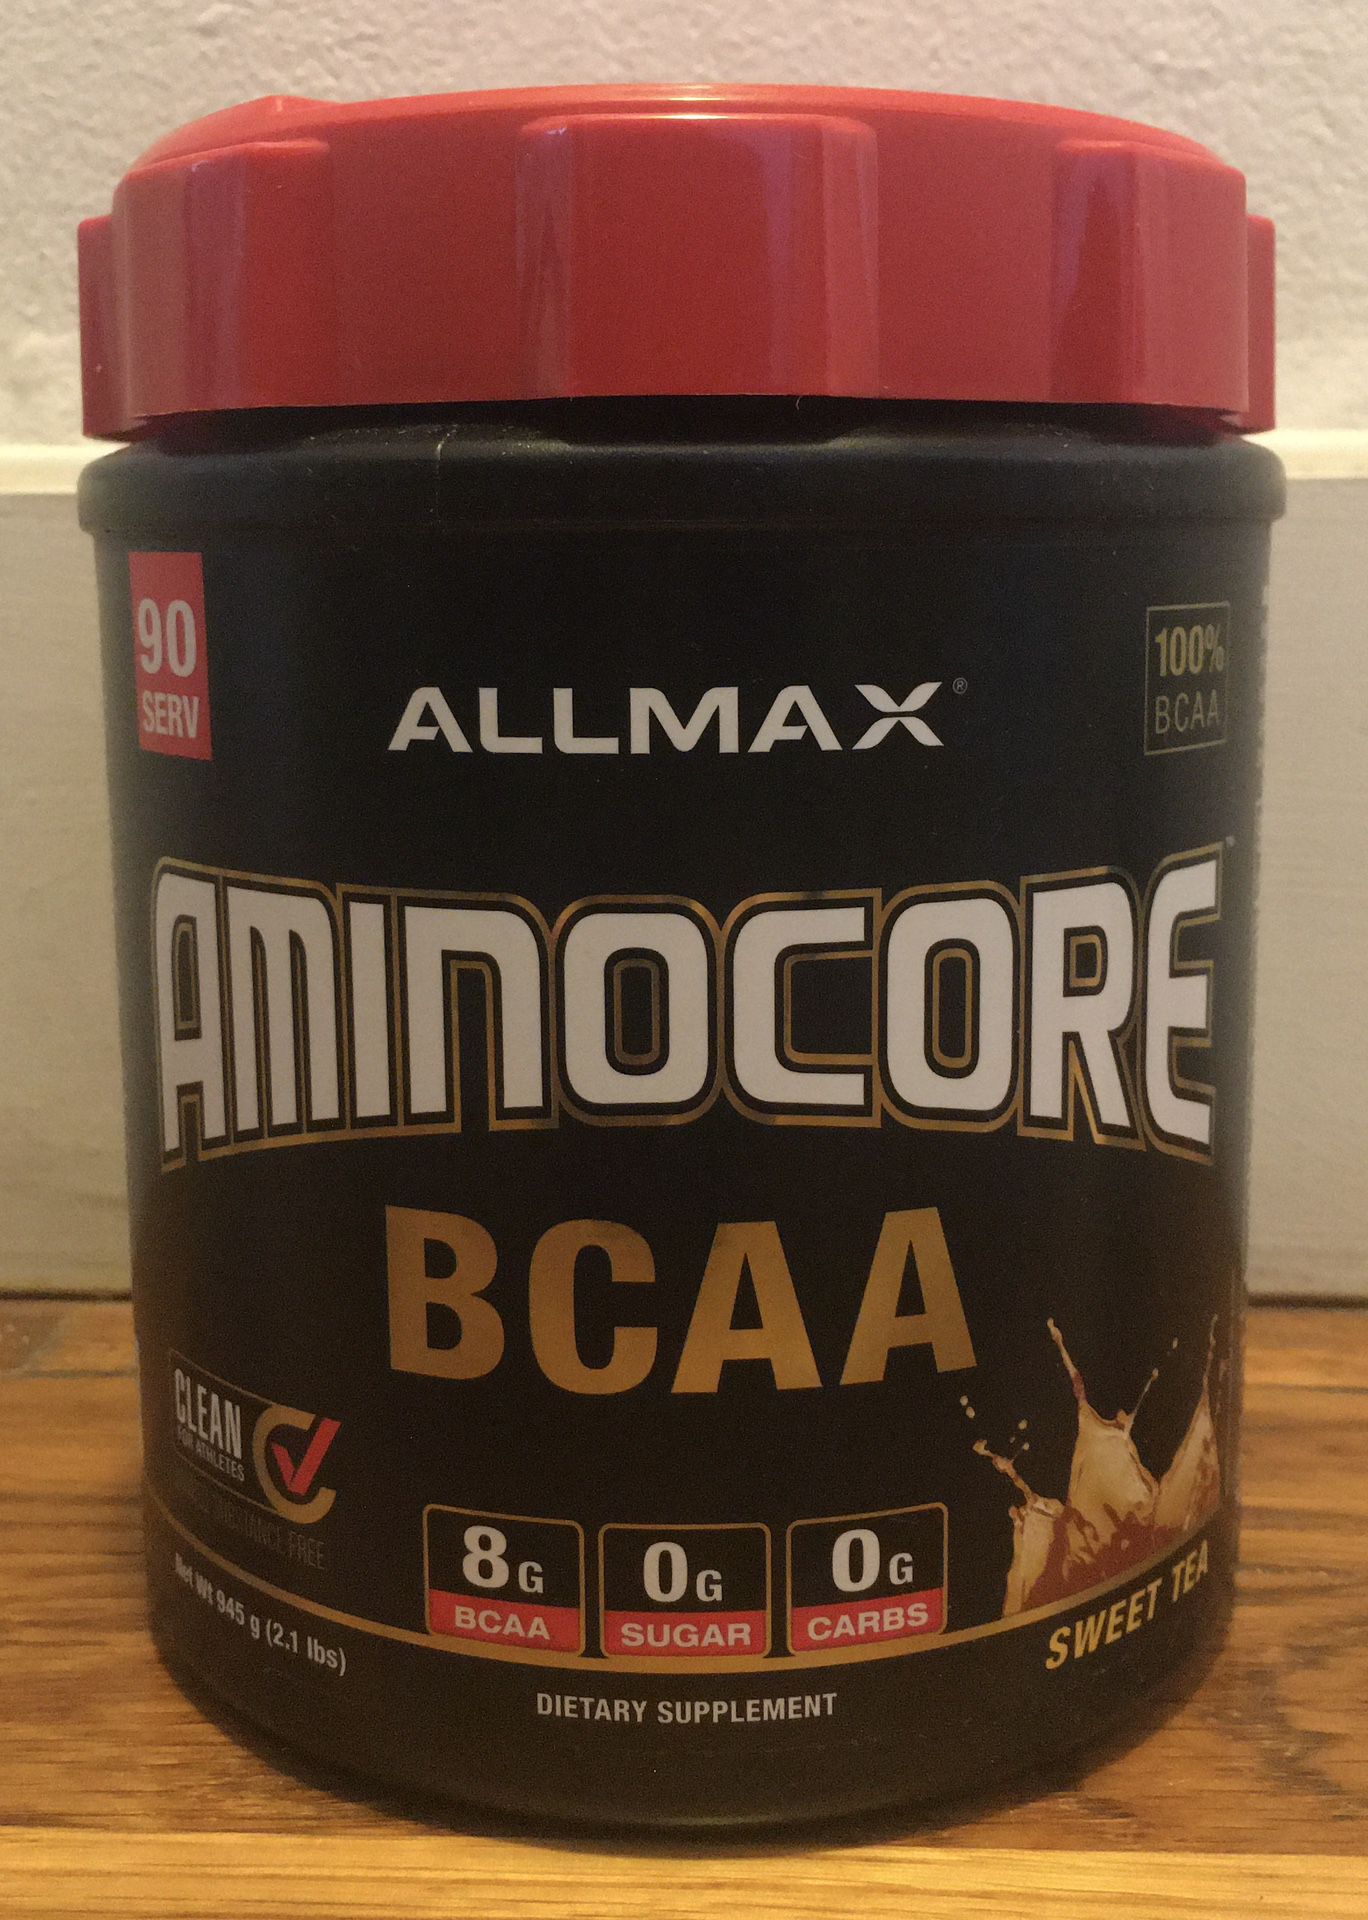 ALLMAX AMINOCORE BCAA Sweet Tea 90 servings 945 grams 2.1 lbs Branched Chain Ami